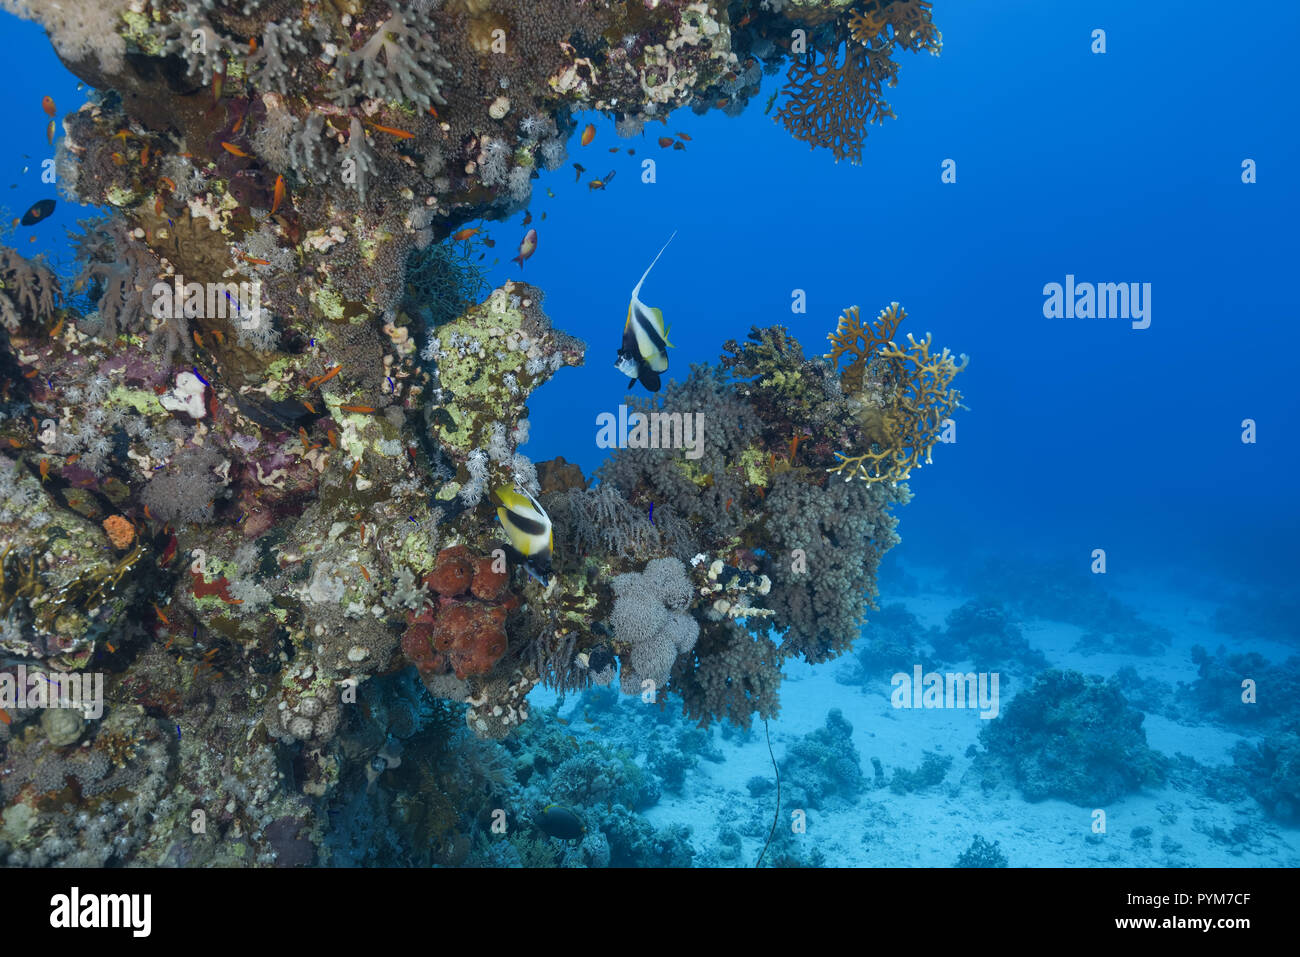 Underwater landscape with beautiful coral reef and pair Red Sea Bannerfish, Heniochus intermedius Stock Photo